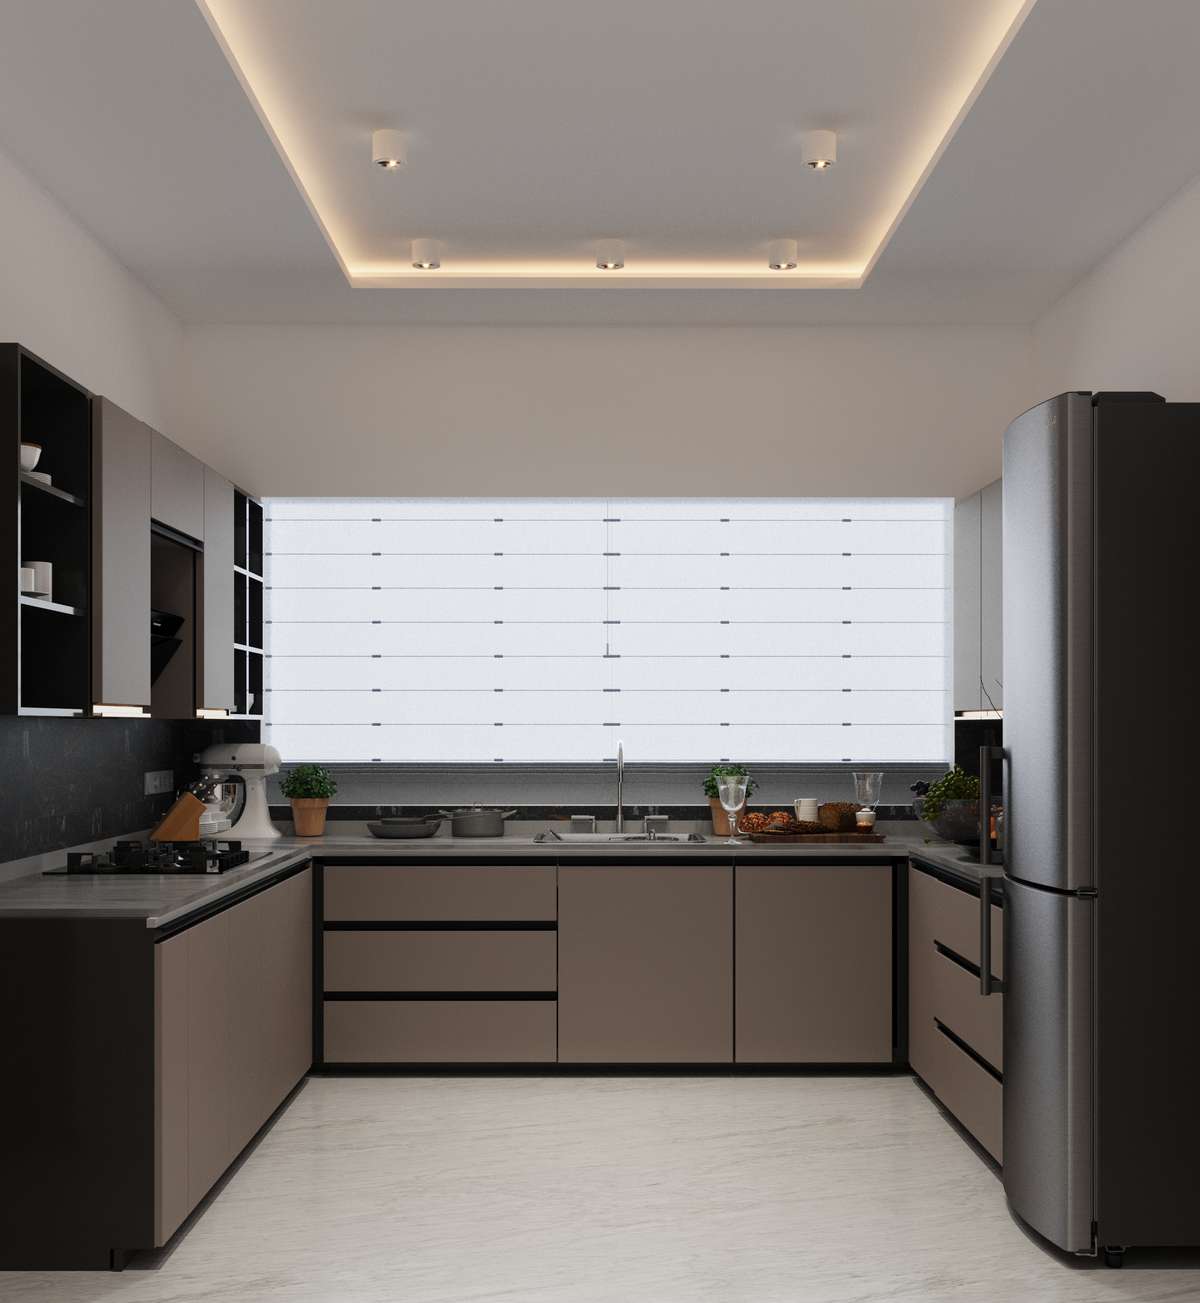 Ceiling, Lighting, Kitchen, Storage Designs by 3D & CAD Faa sthaayi, Kozhikode | Kolo